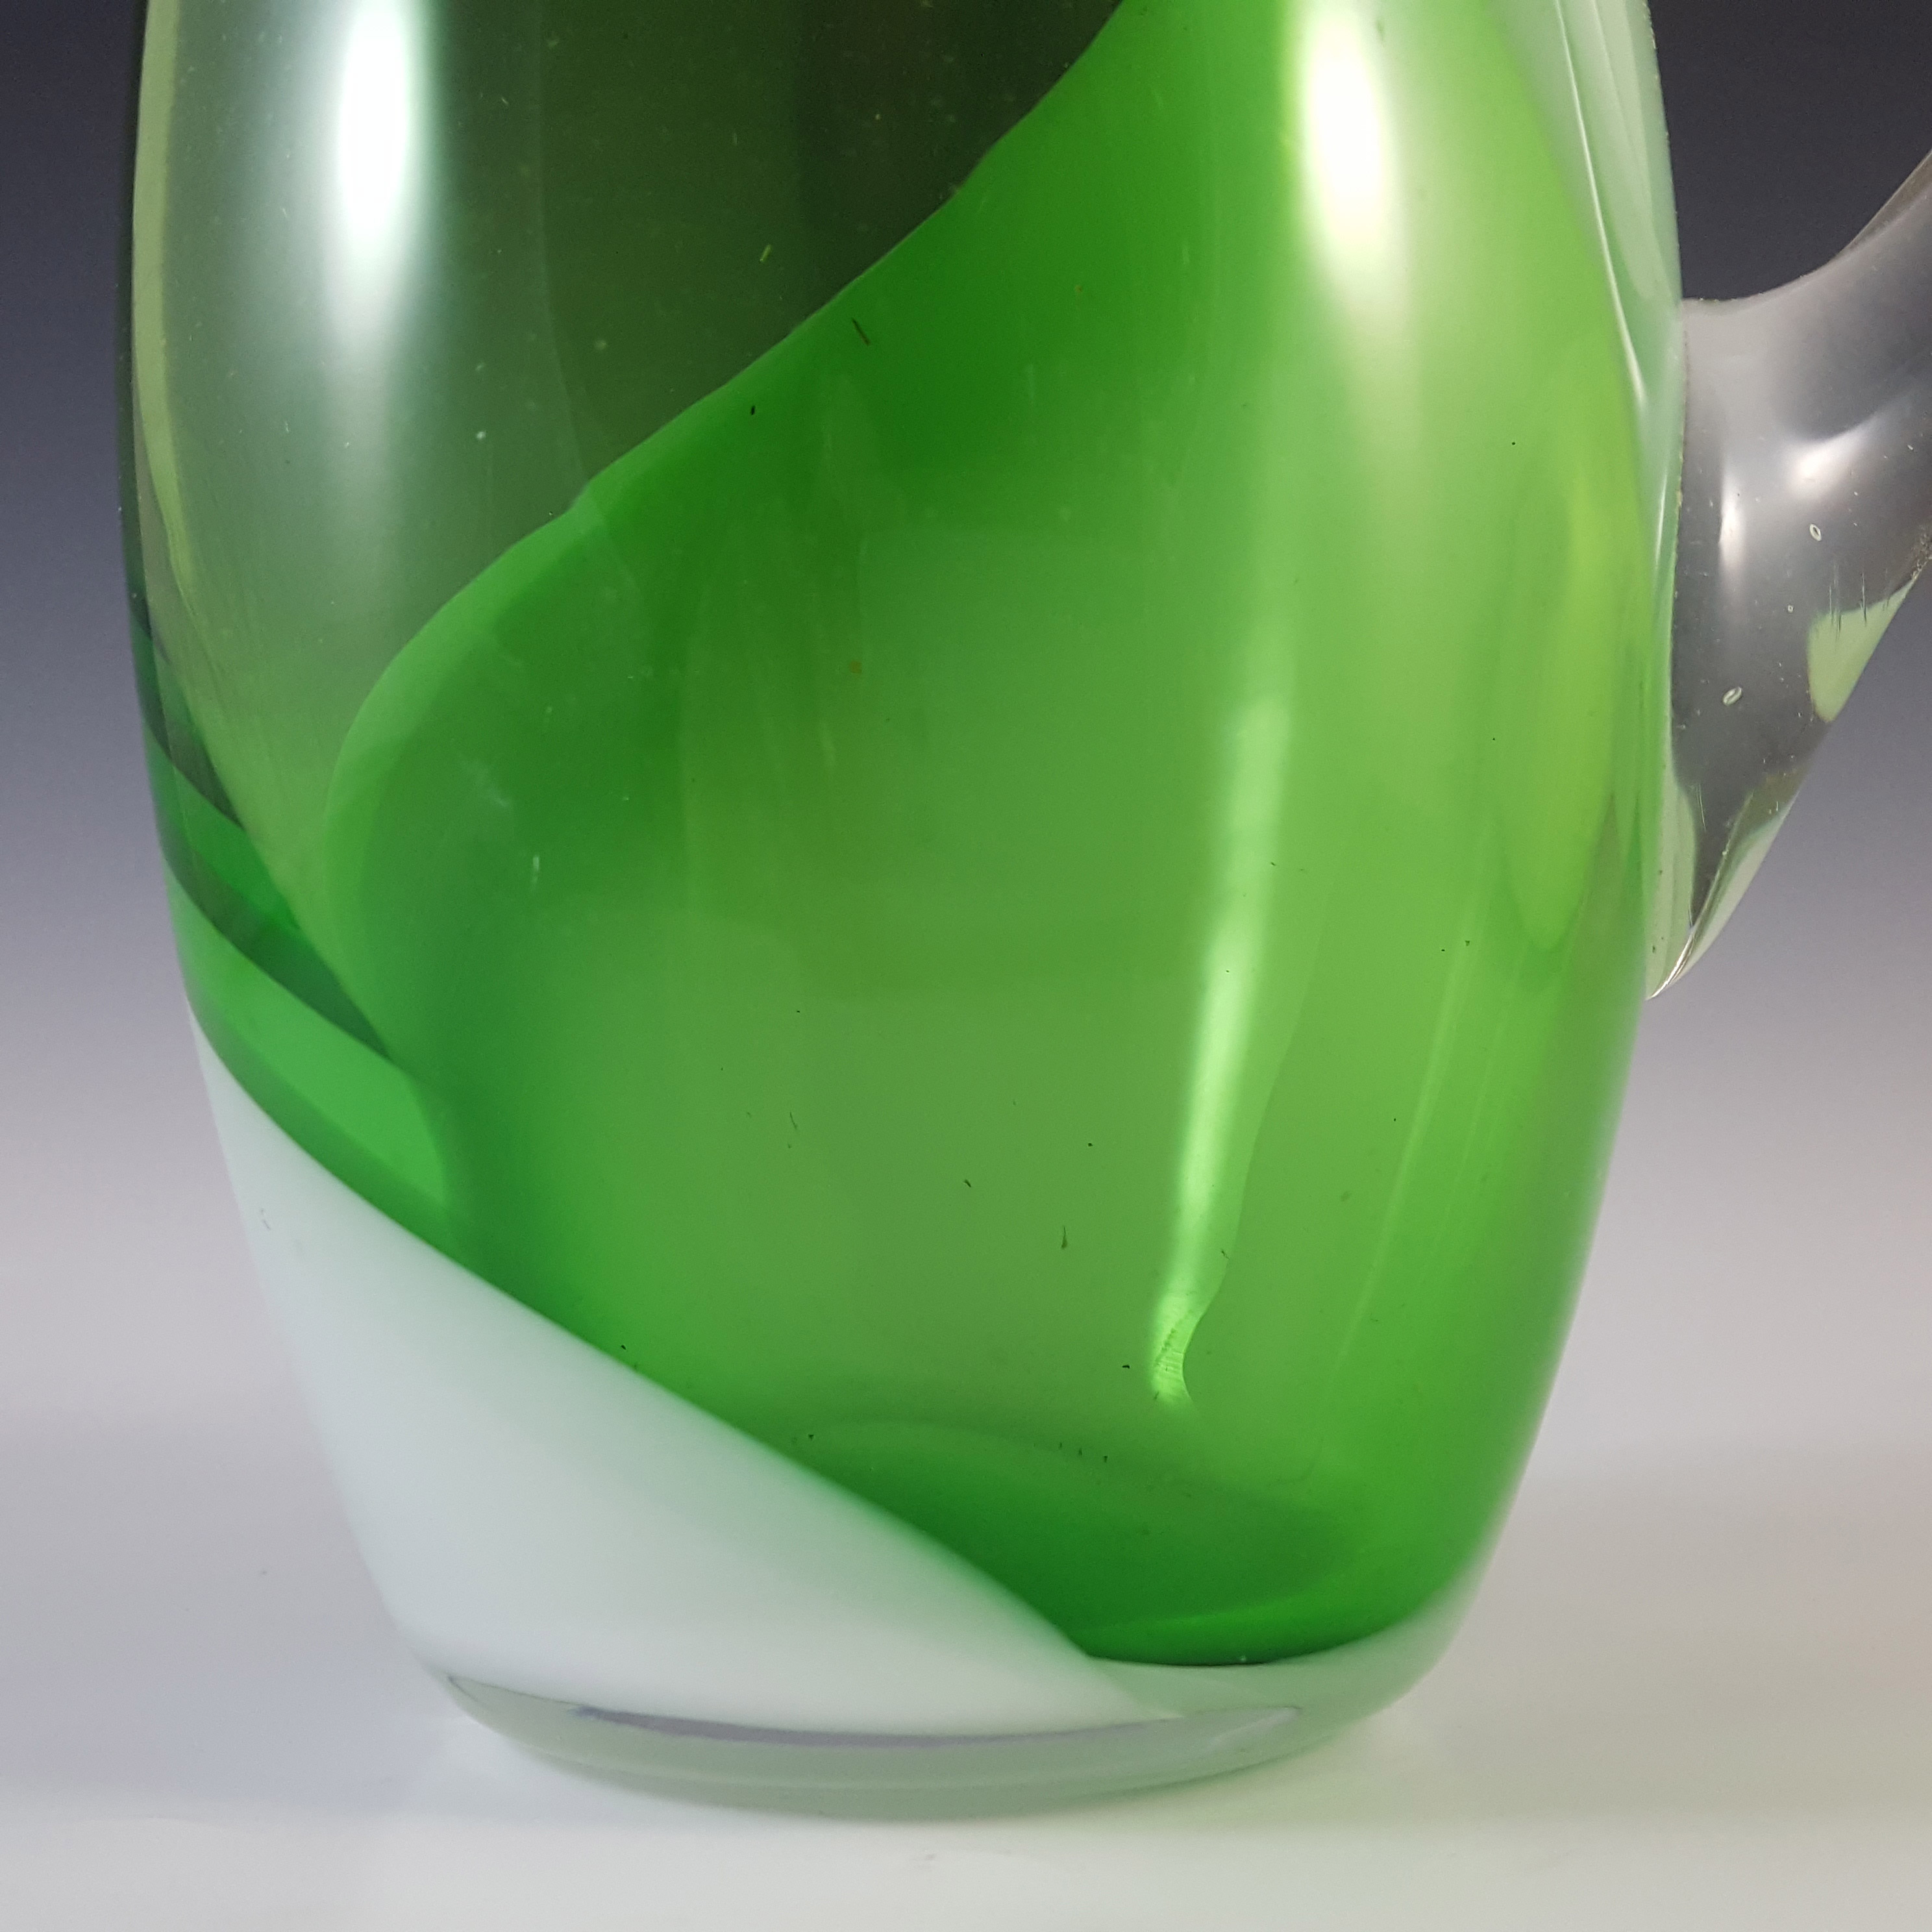 BOXED & LABELLED Sanyu Japanese Green & White Glass Jug / Pitcher - Click Image to Close